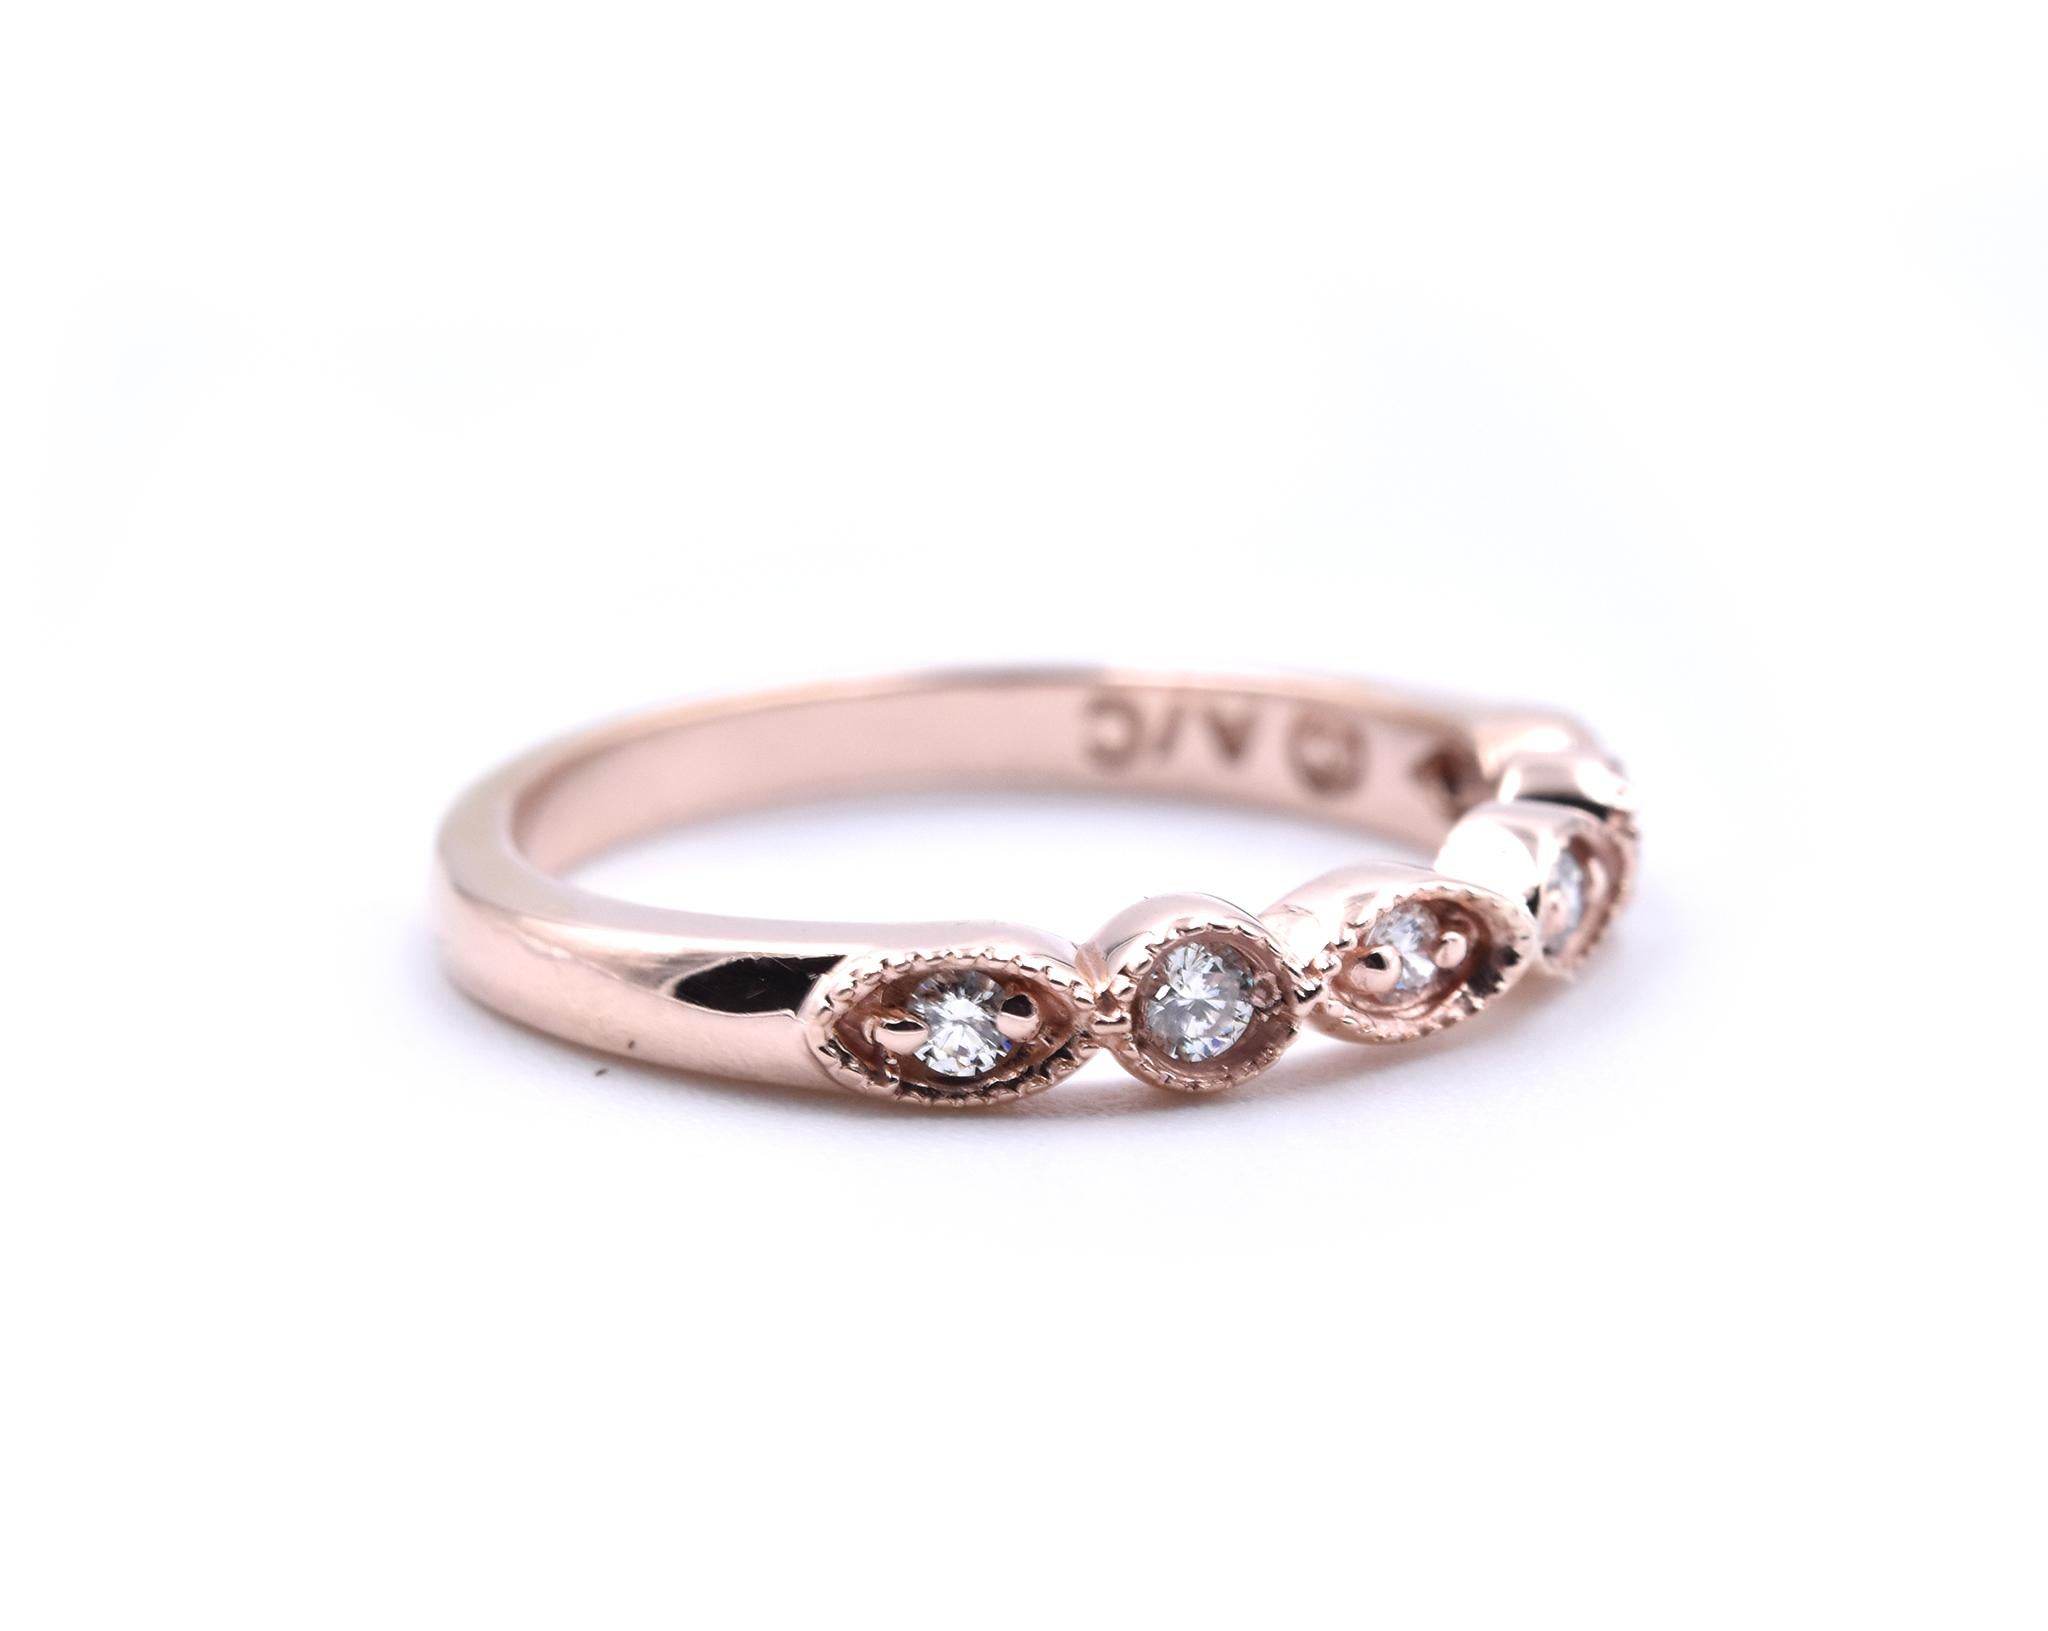 Designer: custom 
Material: 14k rose gold 
Diamonds: 5 round brilliant cuts = 0.15cttw
Size: 5 ½ (please allow two additional shipping days for sizing requests)  
Dimensions: ring measures 2.93mm wide
Weight: 2.37 grams